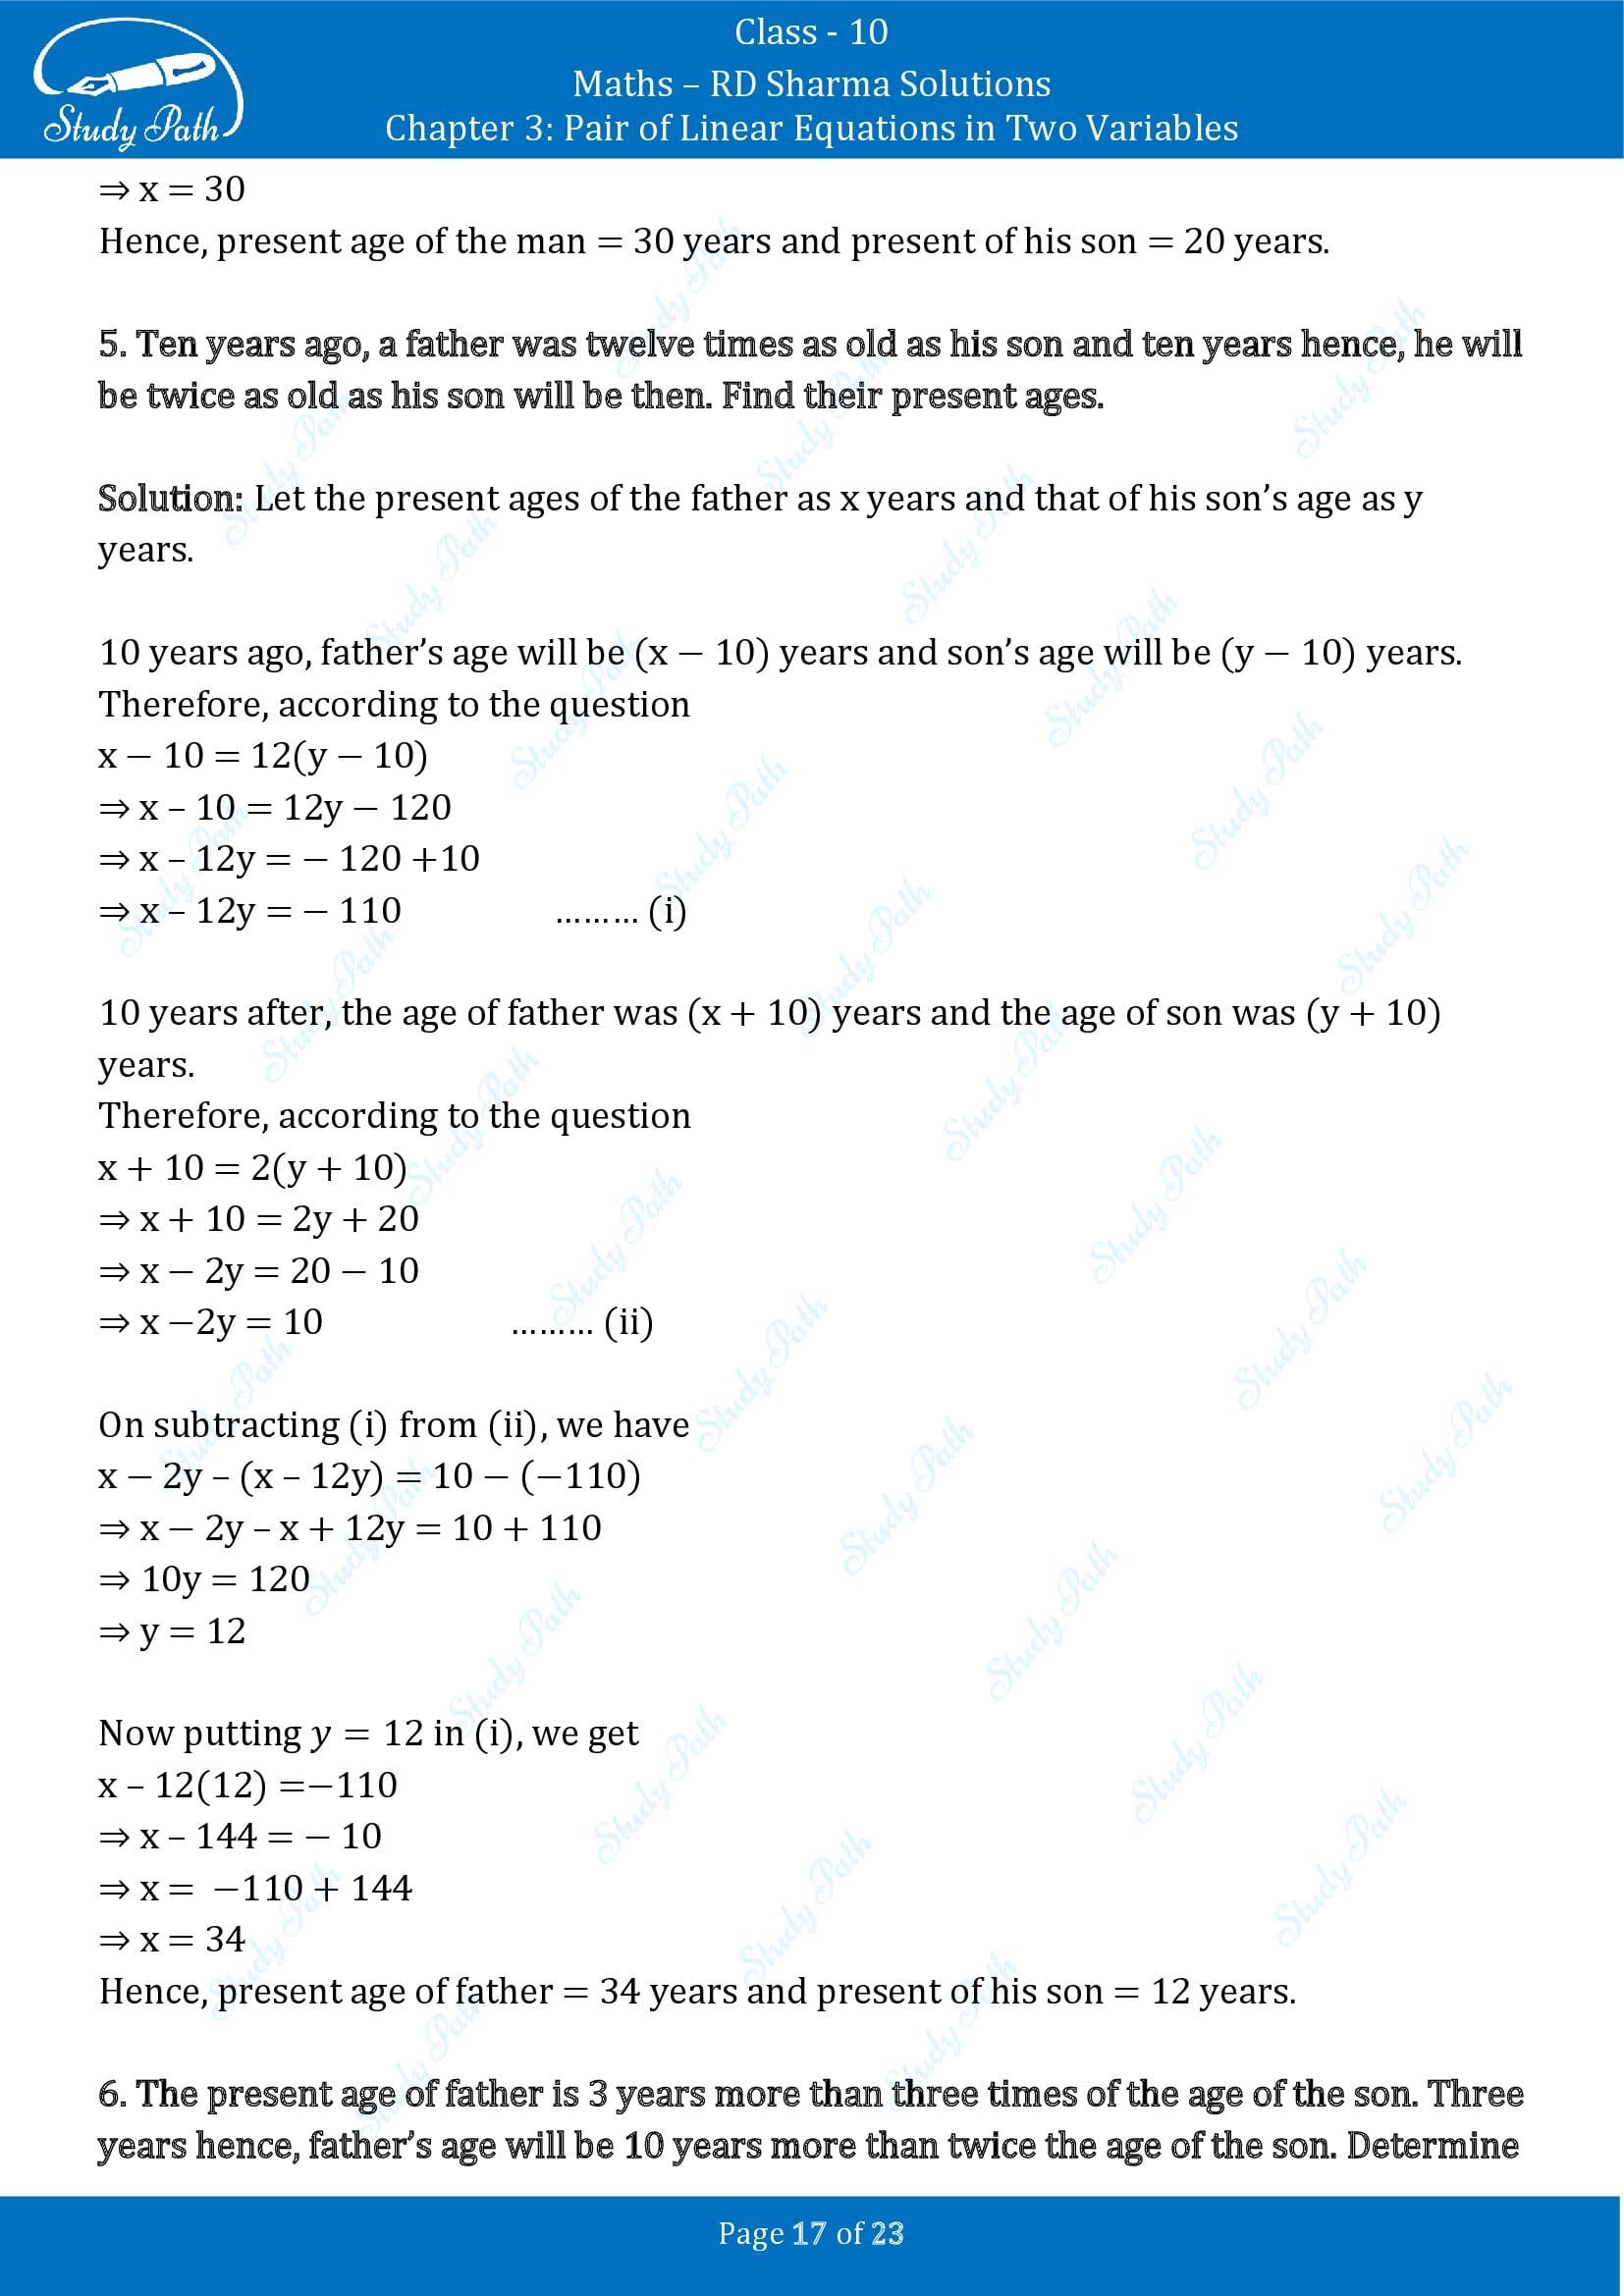 RD Sharma Solutions Class 10 Chapter 3 Pair of Linear Equations in Two Variables Exercise 3.8 00017